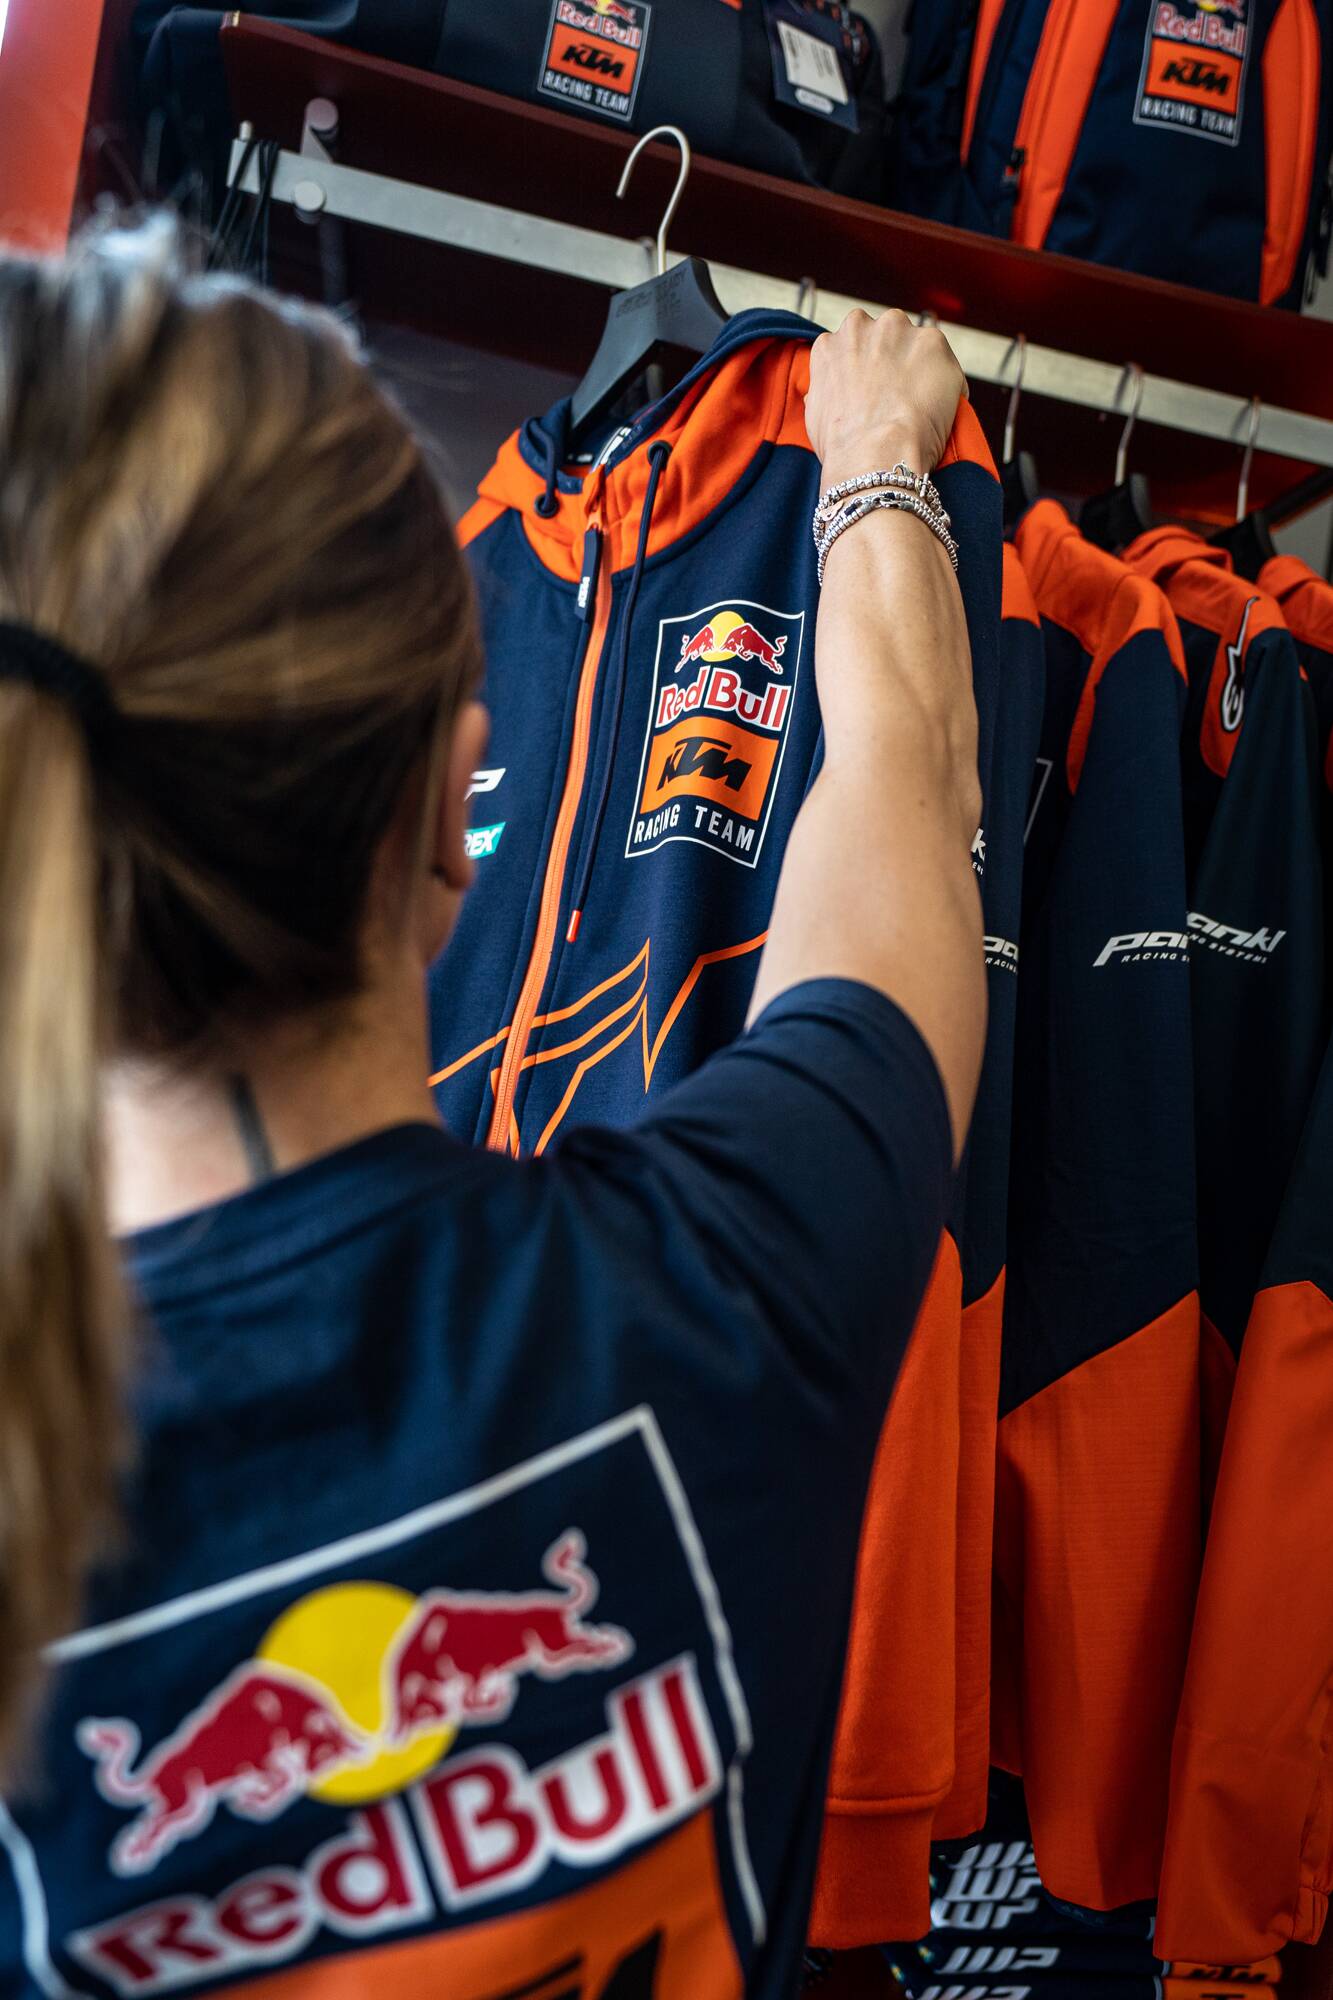 Lifestyle KTM Red Bull collection